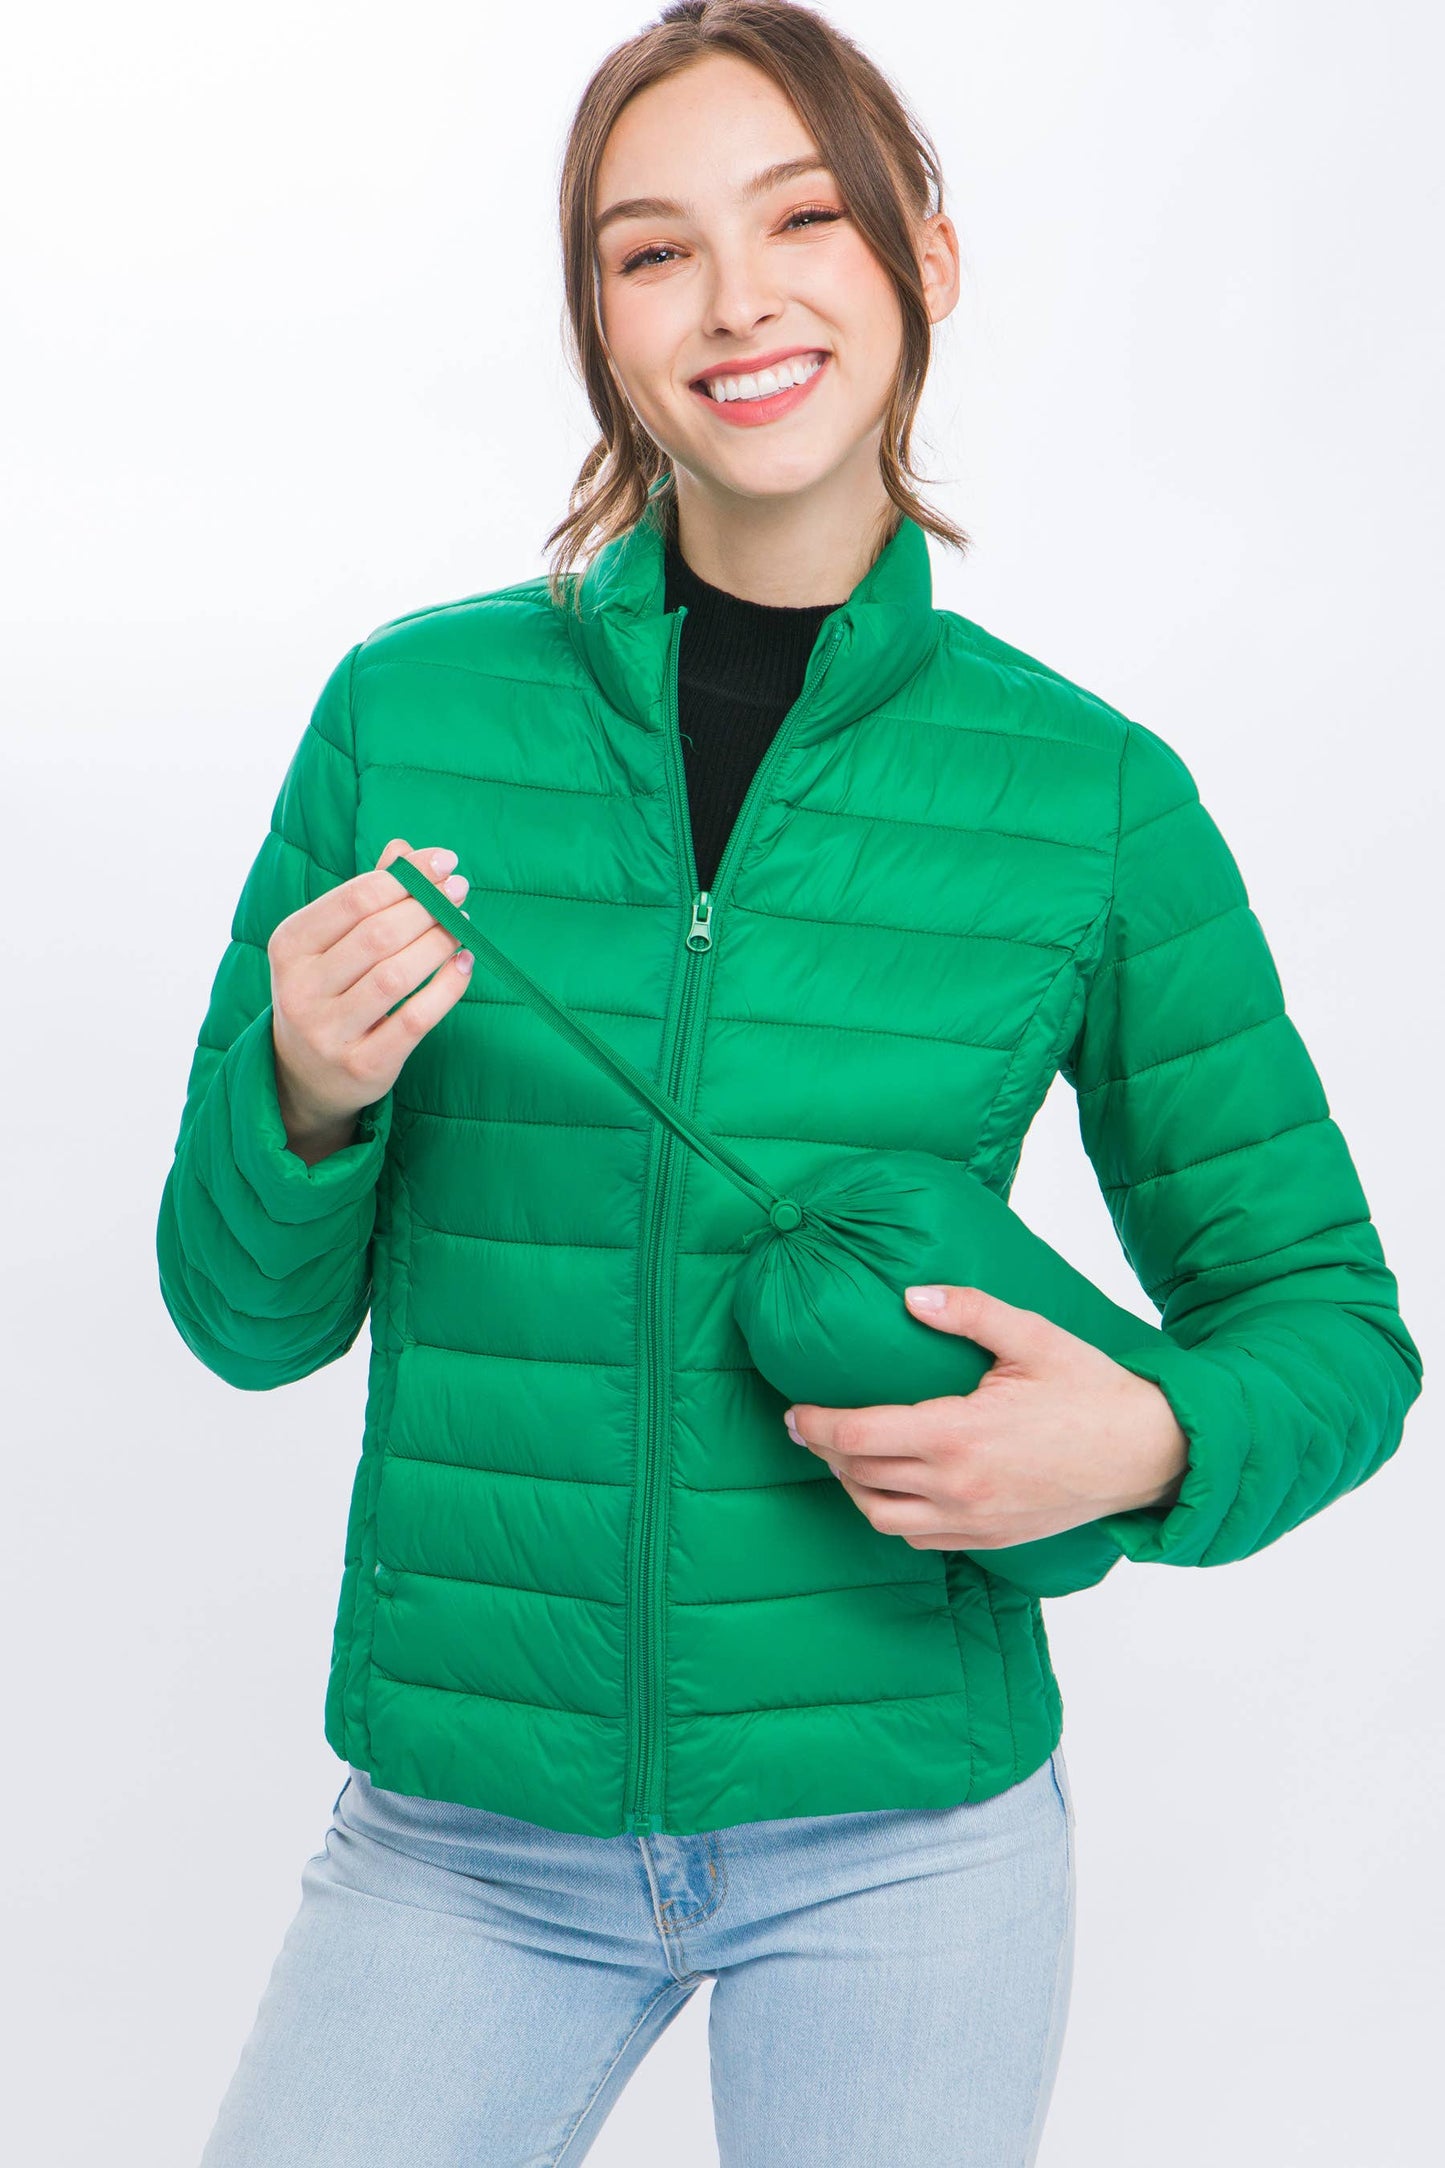 Christmas Ultra Lightweight Padded Thermal Zip Up Jacket: GREEN-160404 / L